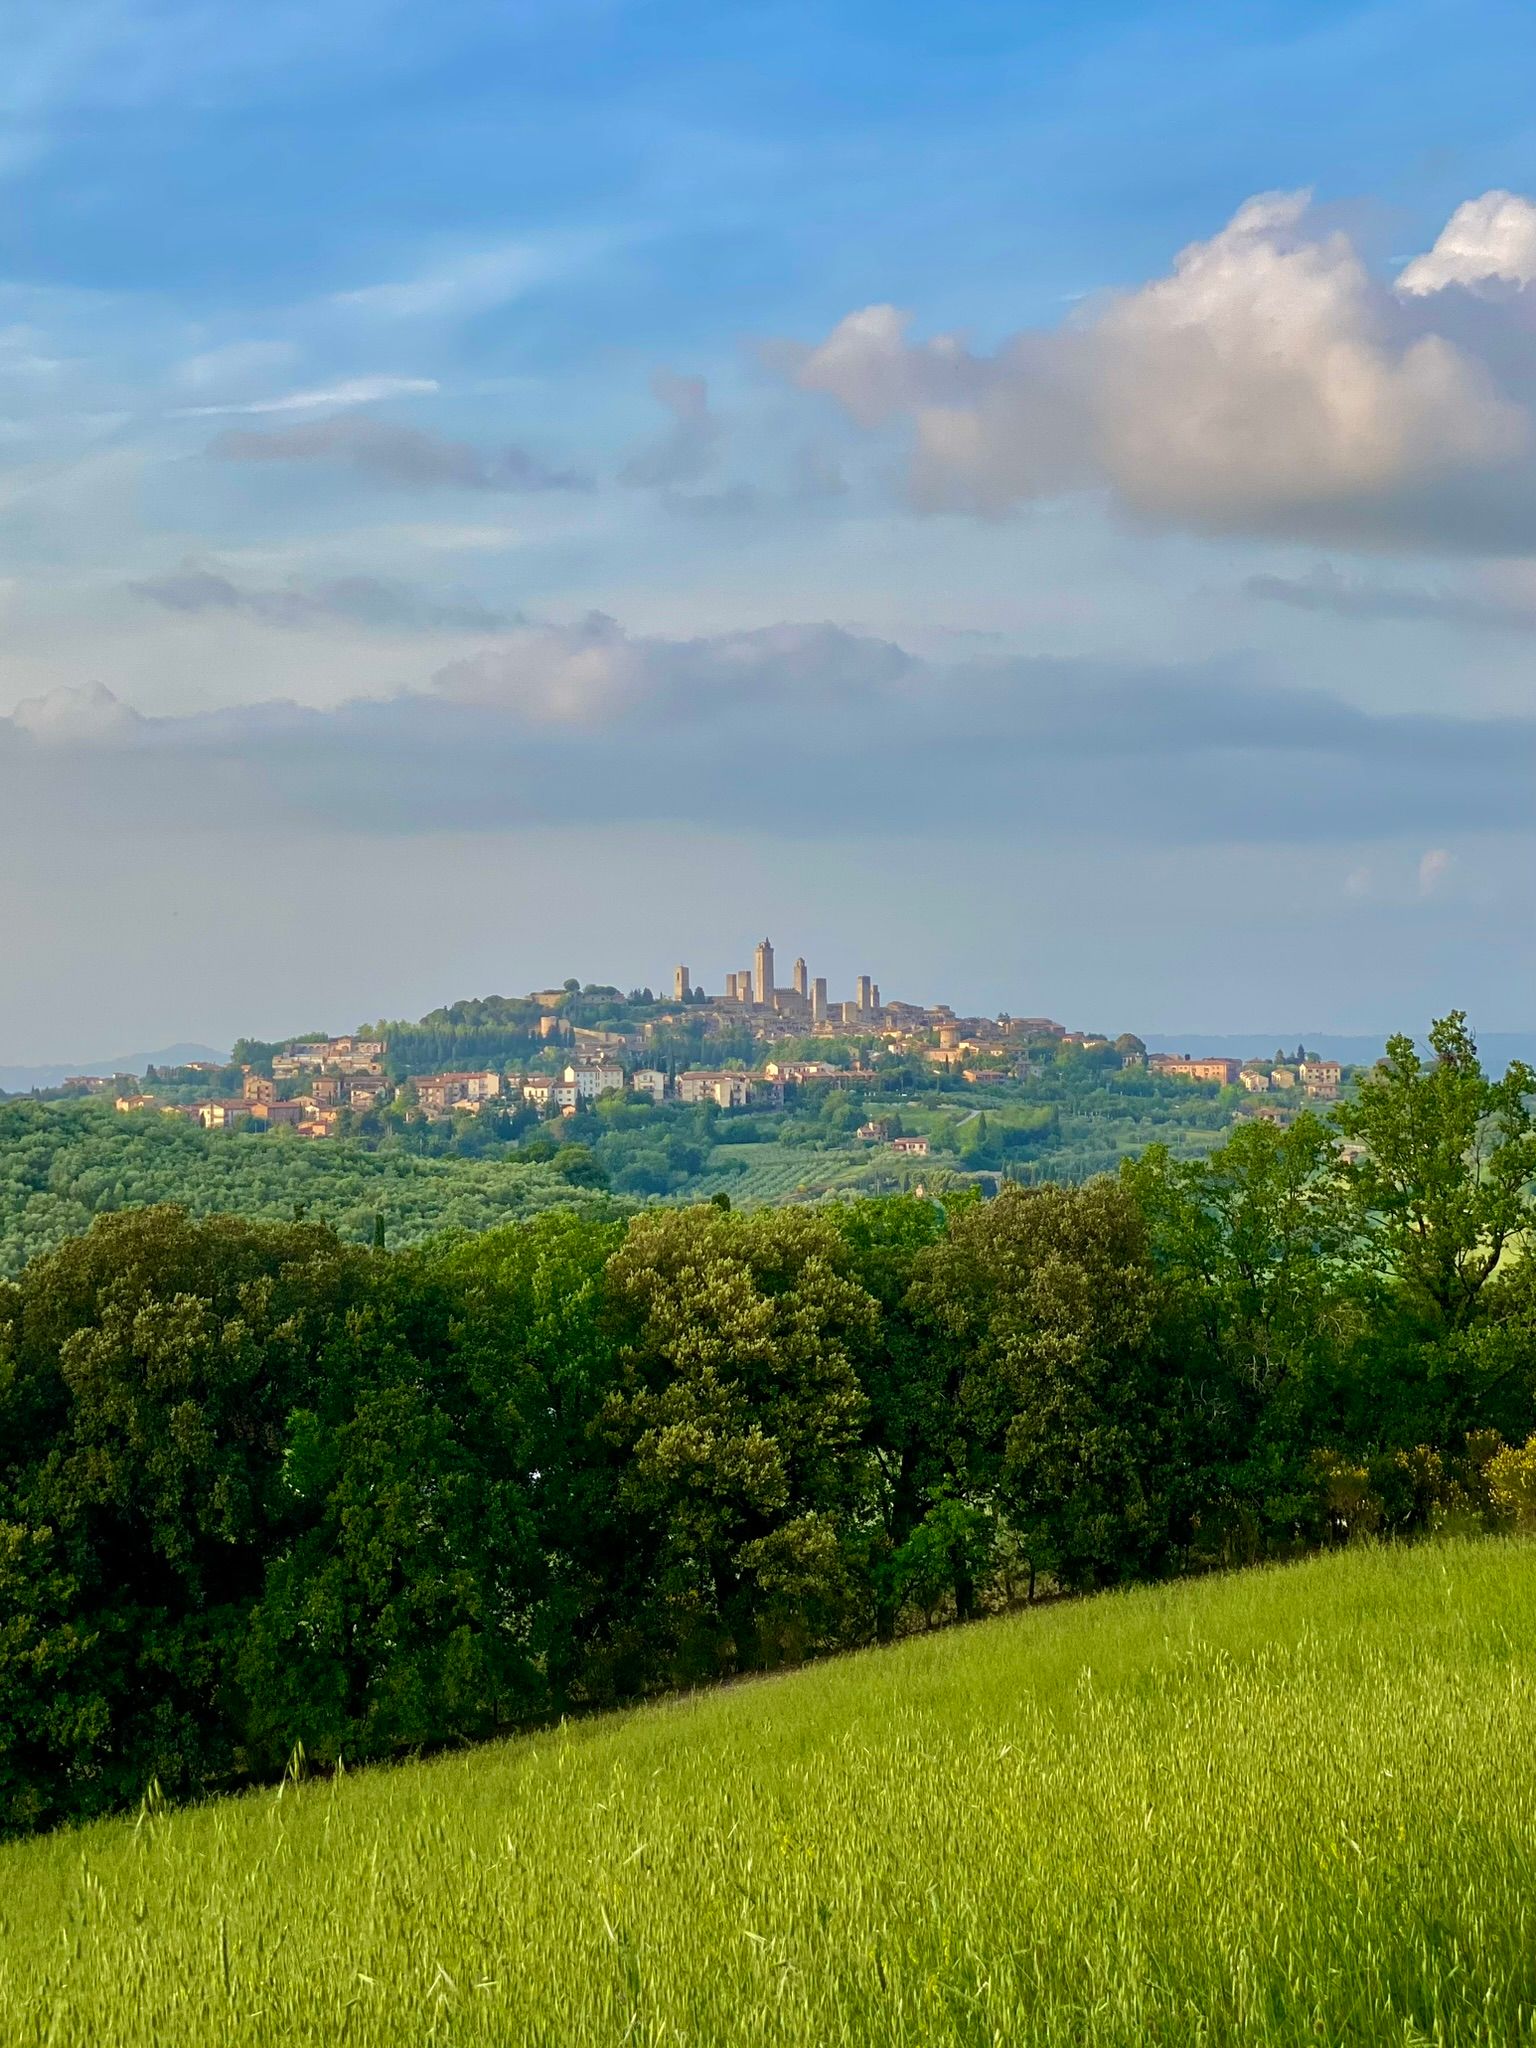 The views over San Gimignano and the green surrounding area never got old